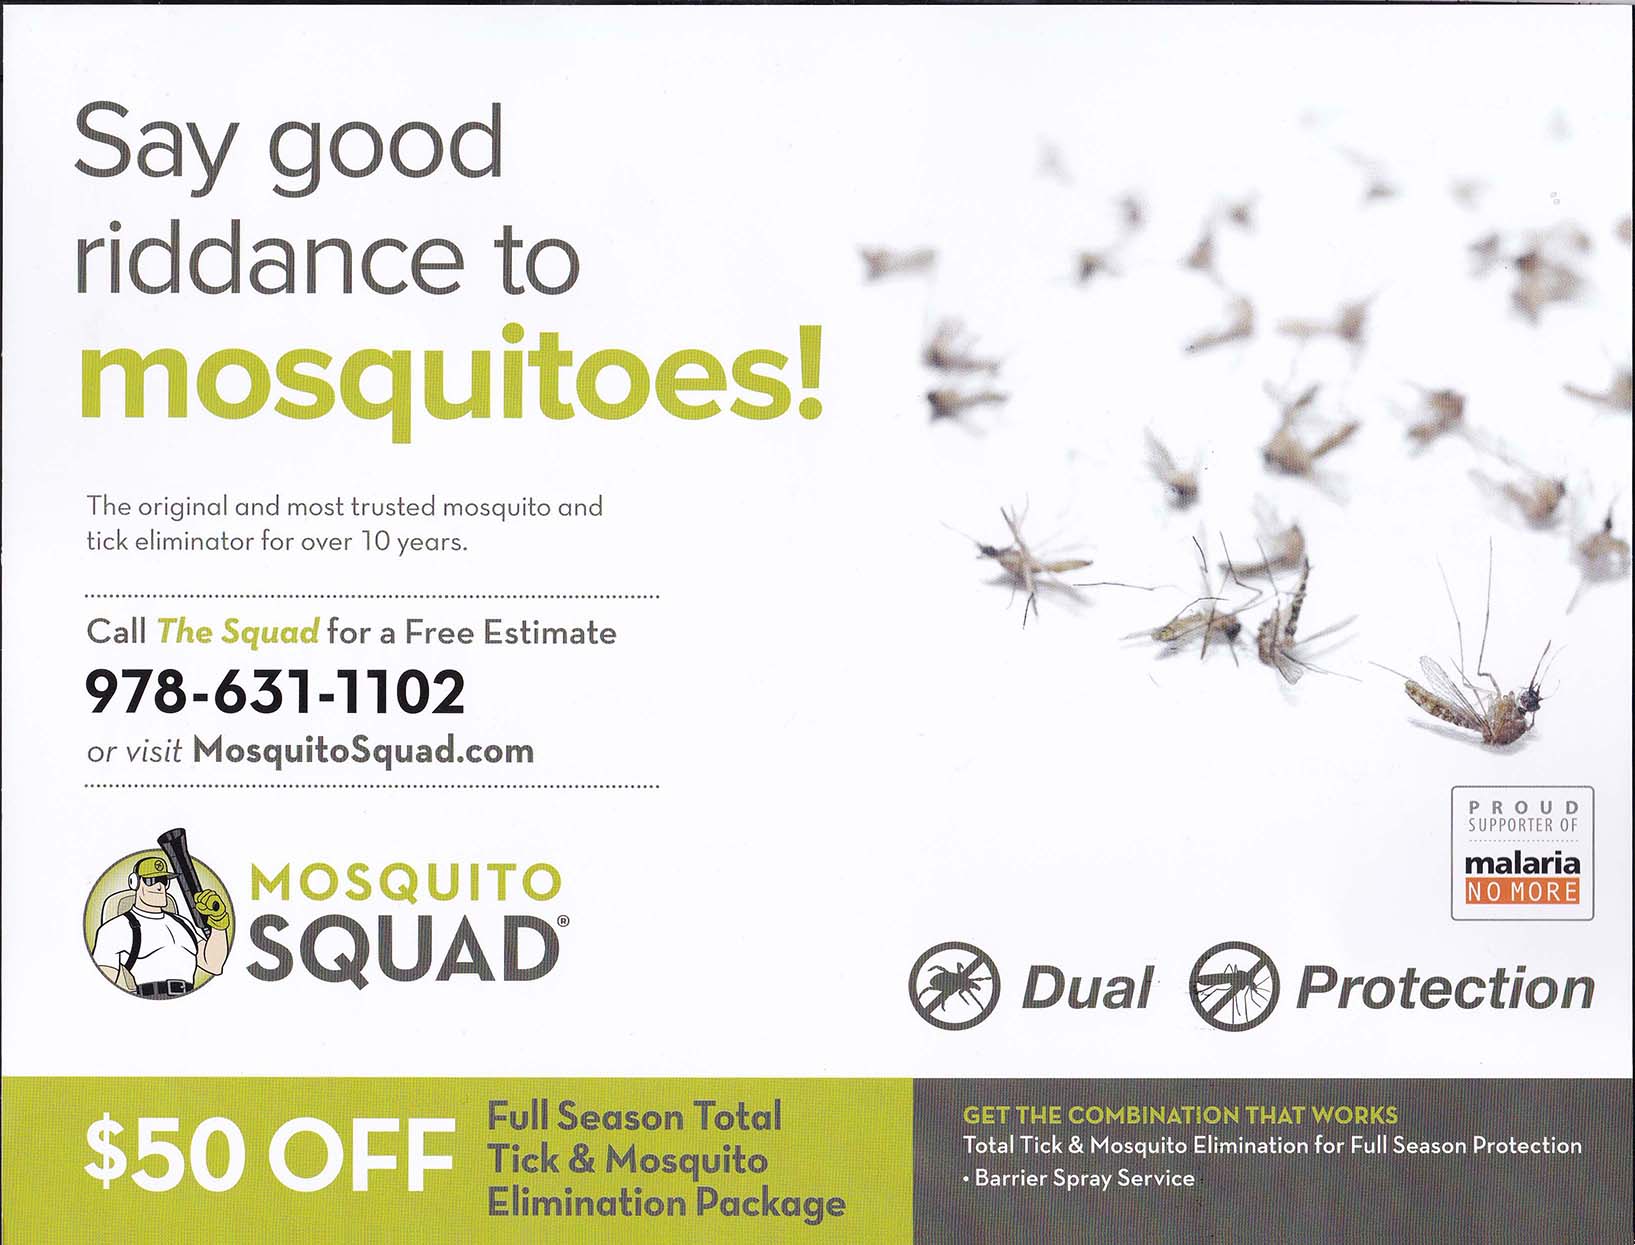 Mosquito Squad - Summer 2017 - Mailing 1 (Early May) - Side 1